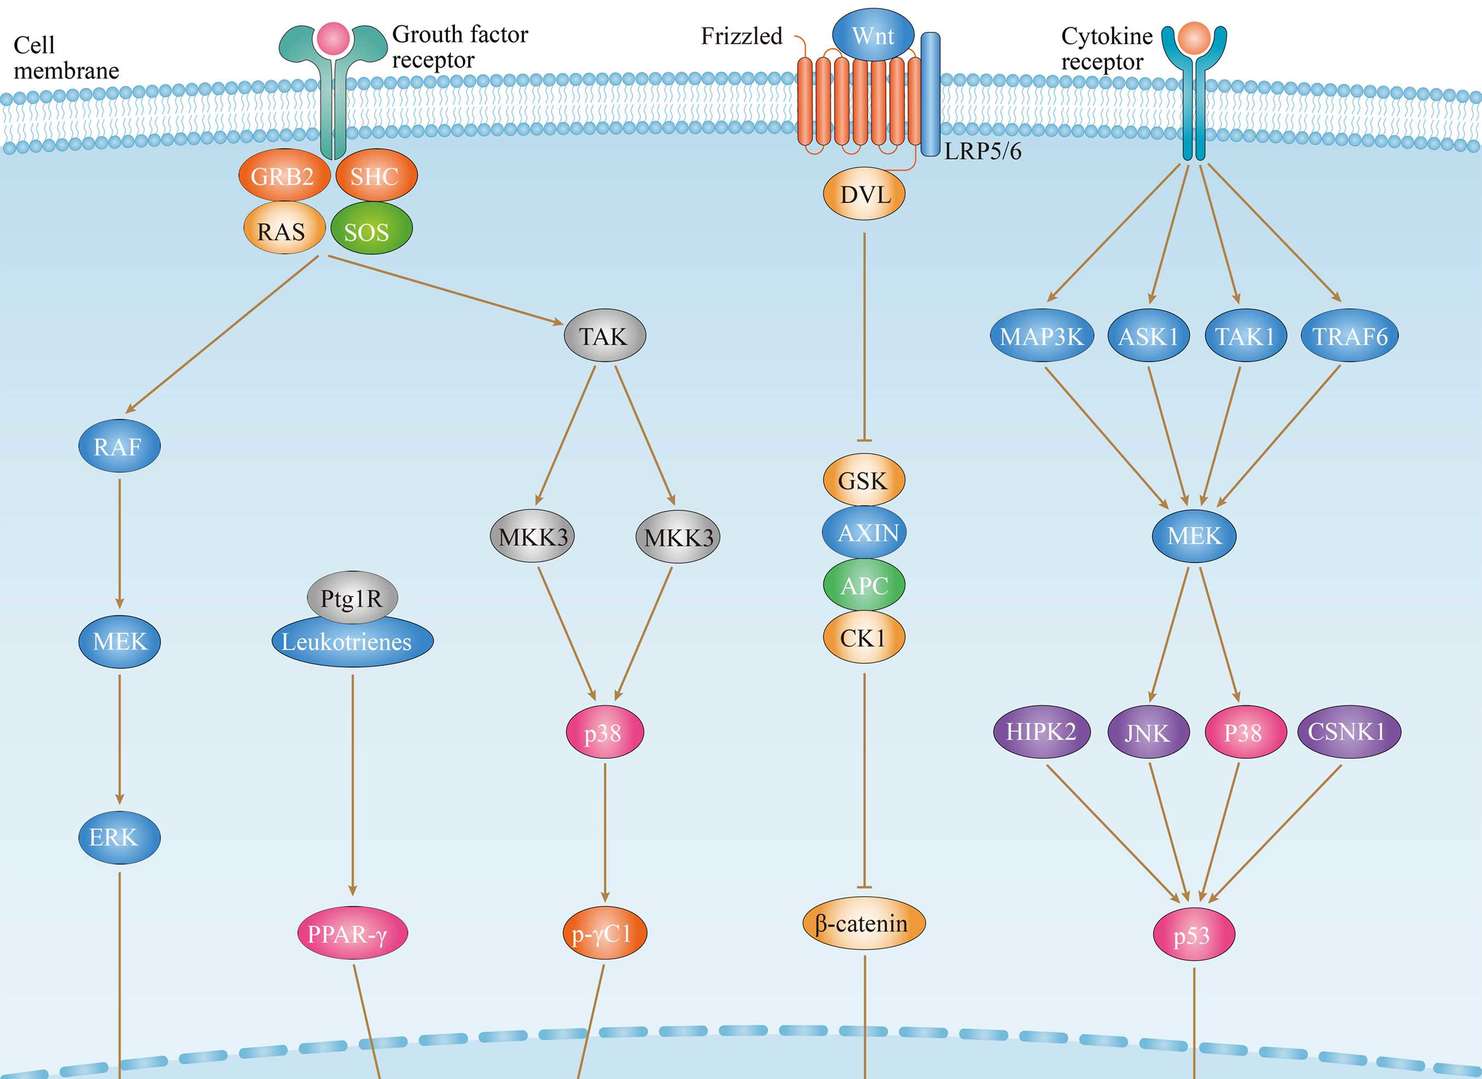 Thyroid Cancer Overview - Pathways, Diagnosis, Targeted Therapies